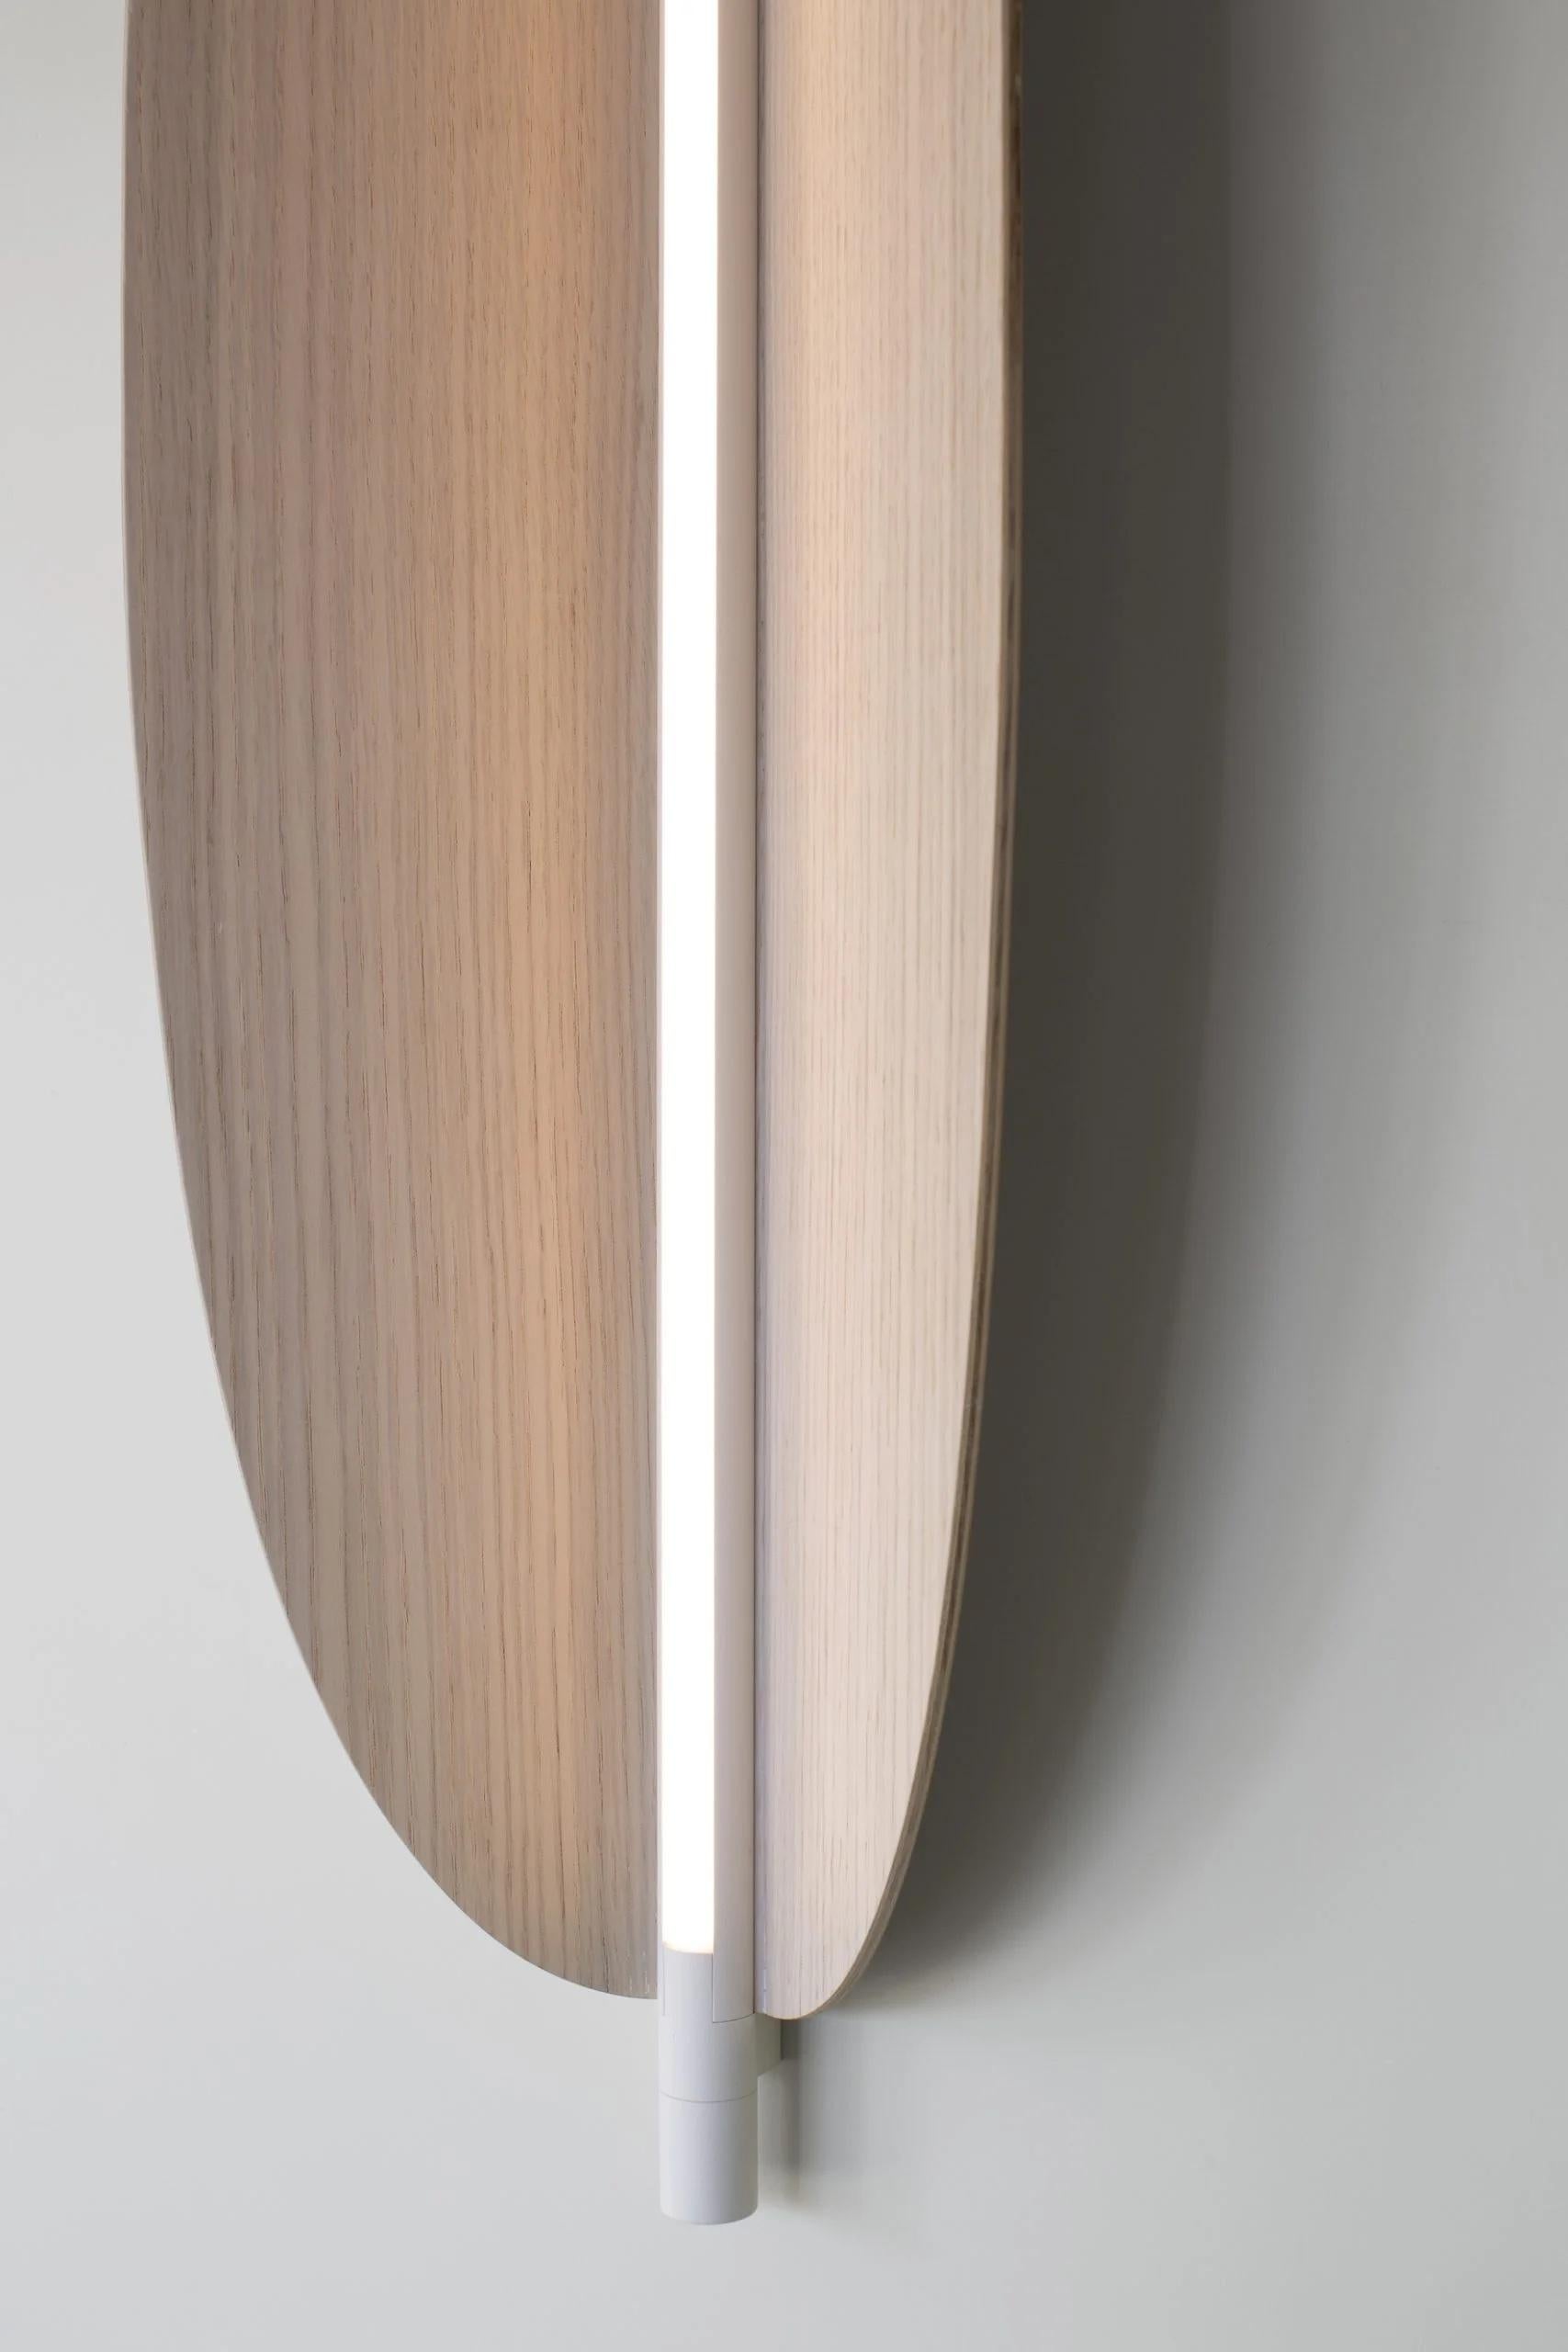 Contemporary Modern Wall Lamp 'Thula 562.41' by Federica Biasi x Tooy, Beige + Leather For Sale